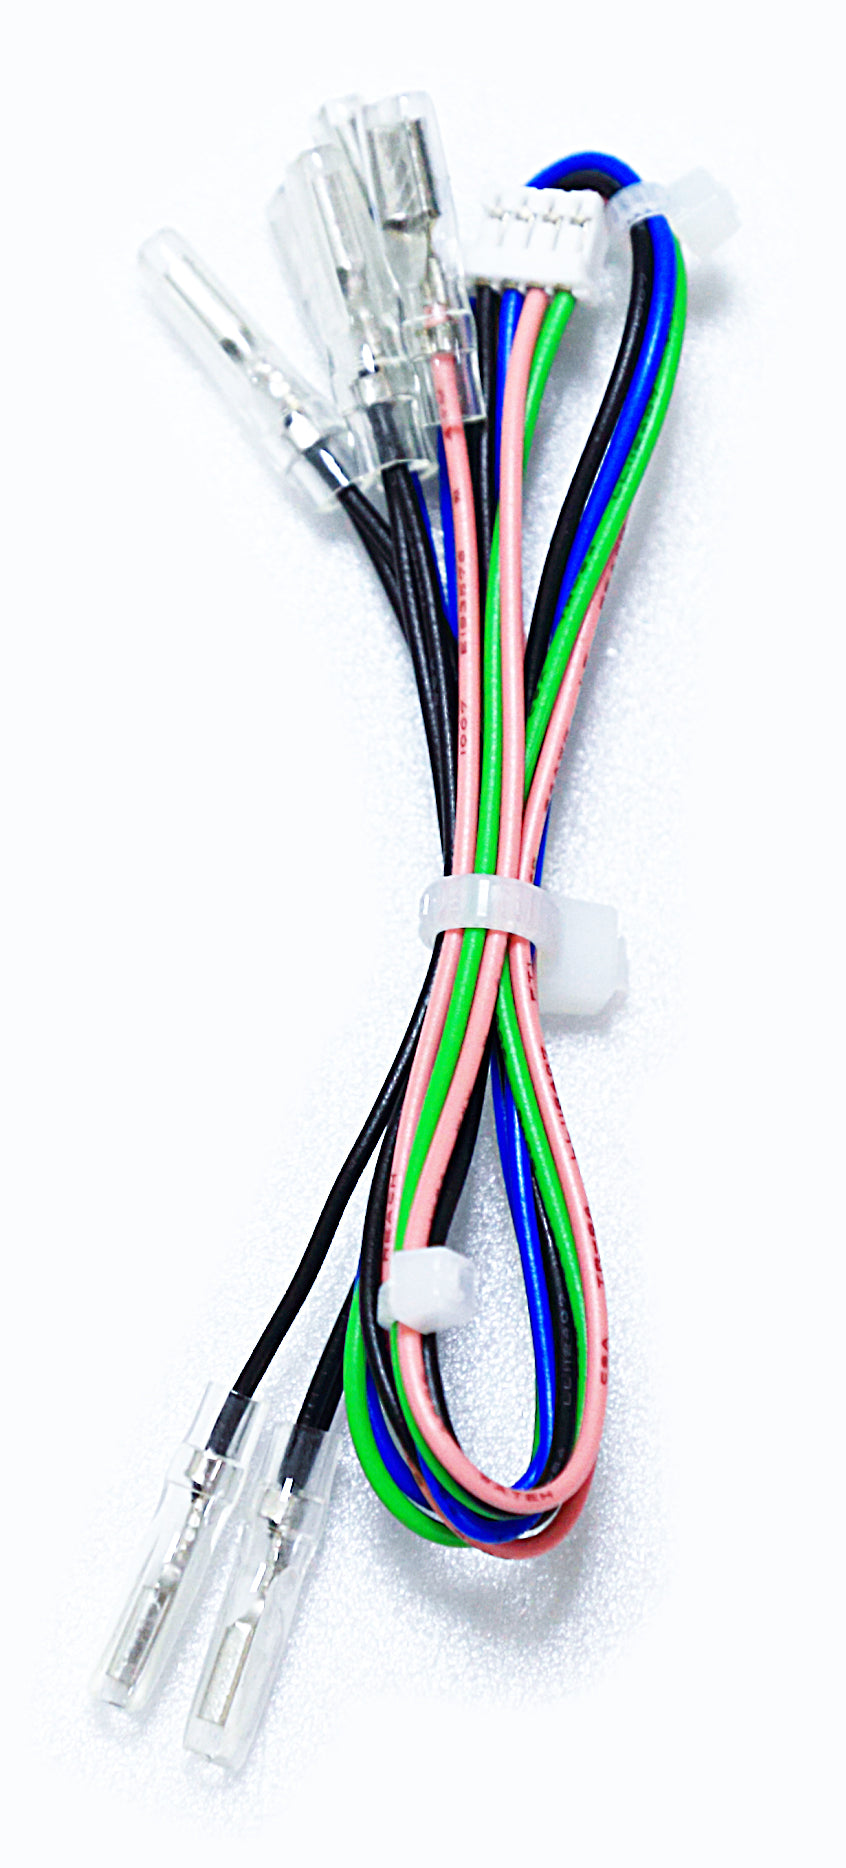 Fighting Board Cable